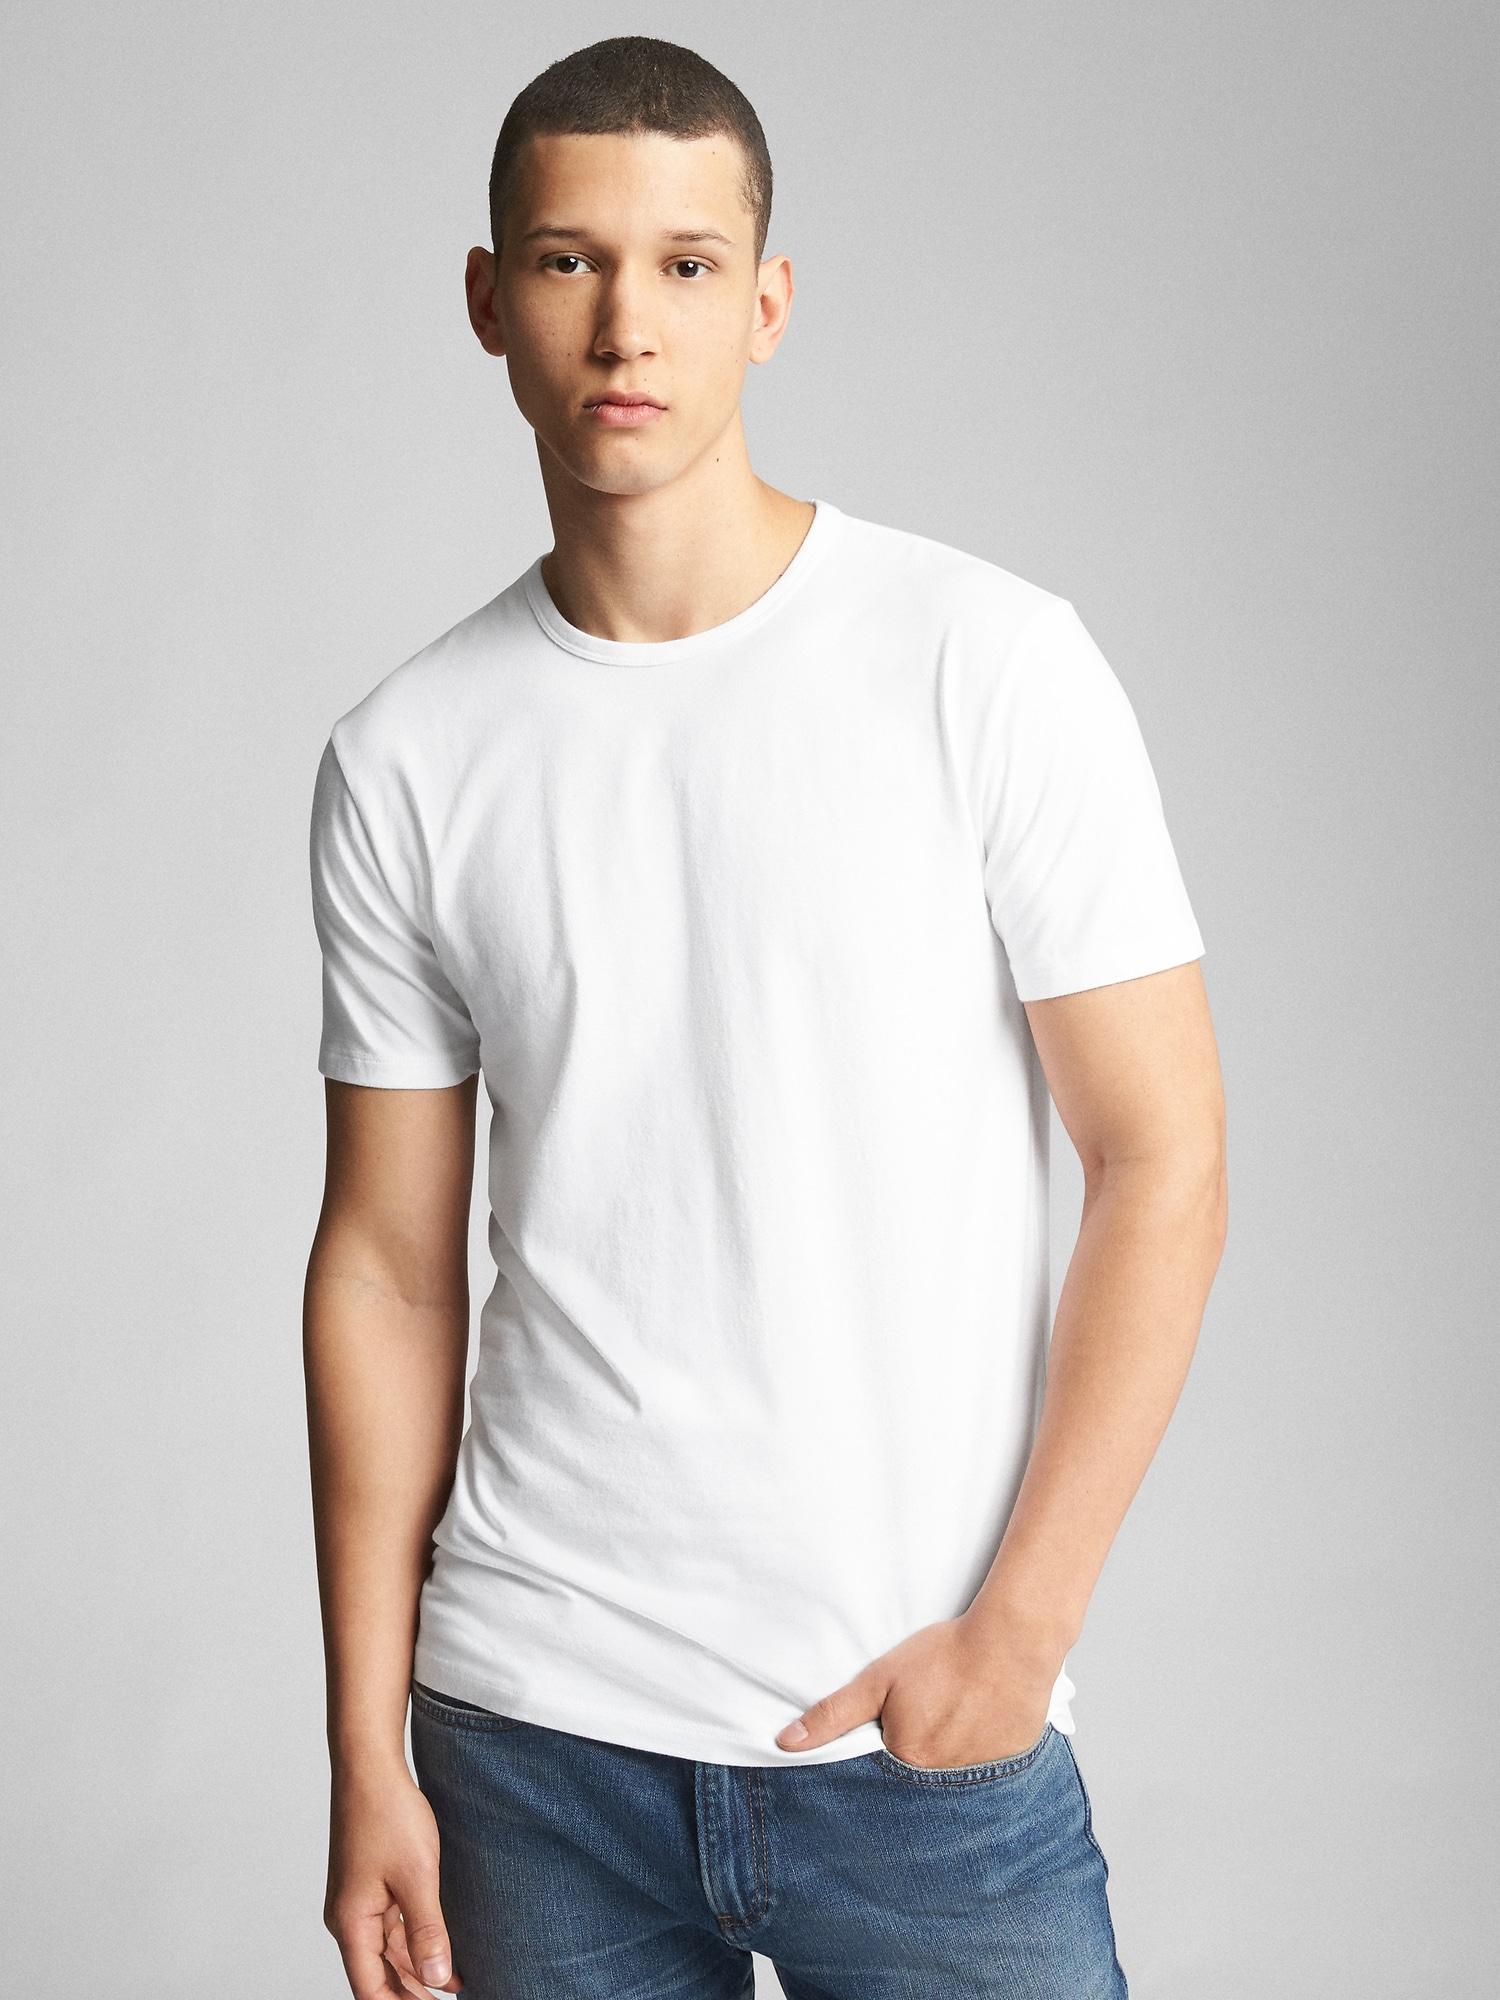 Gap Stretch T-shirt in White for Men - Lyst